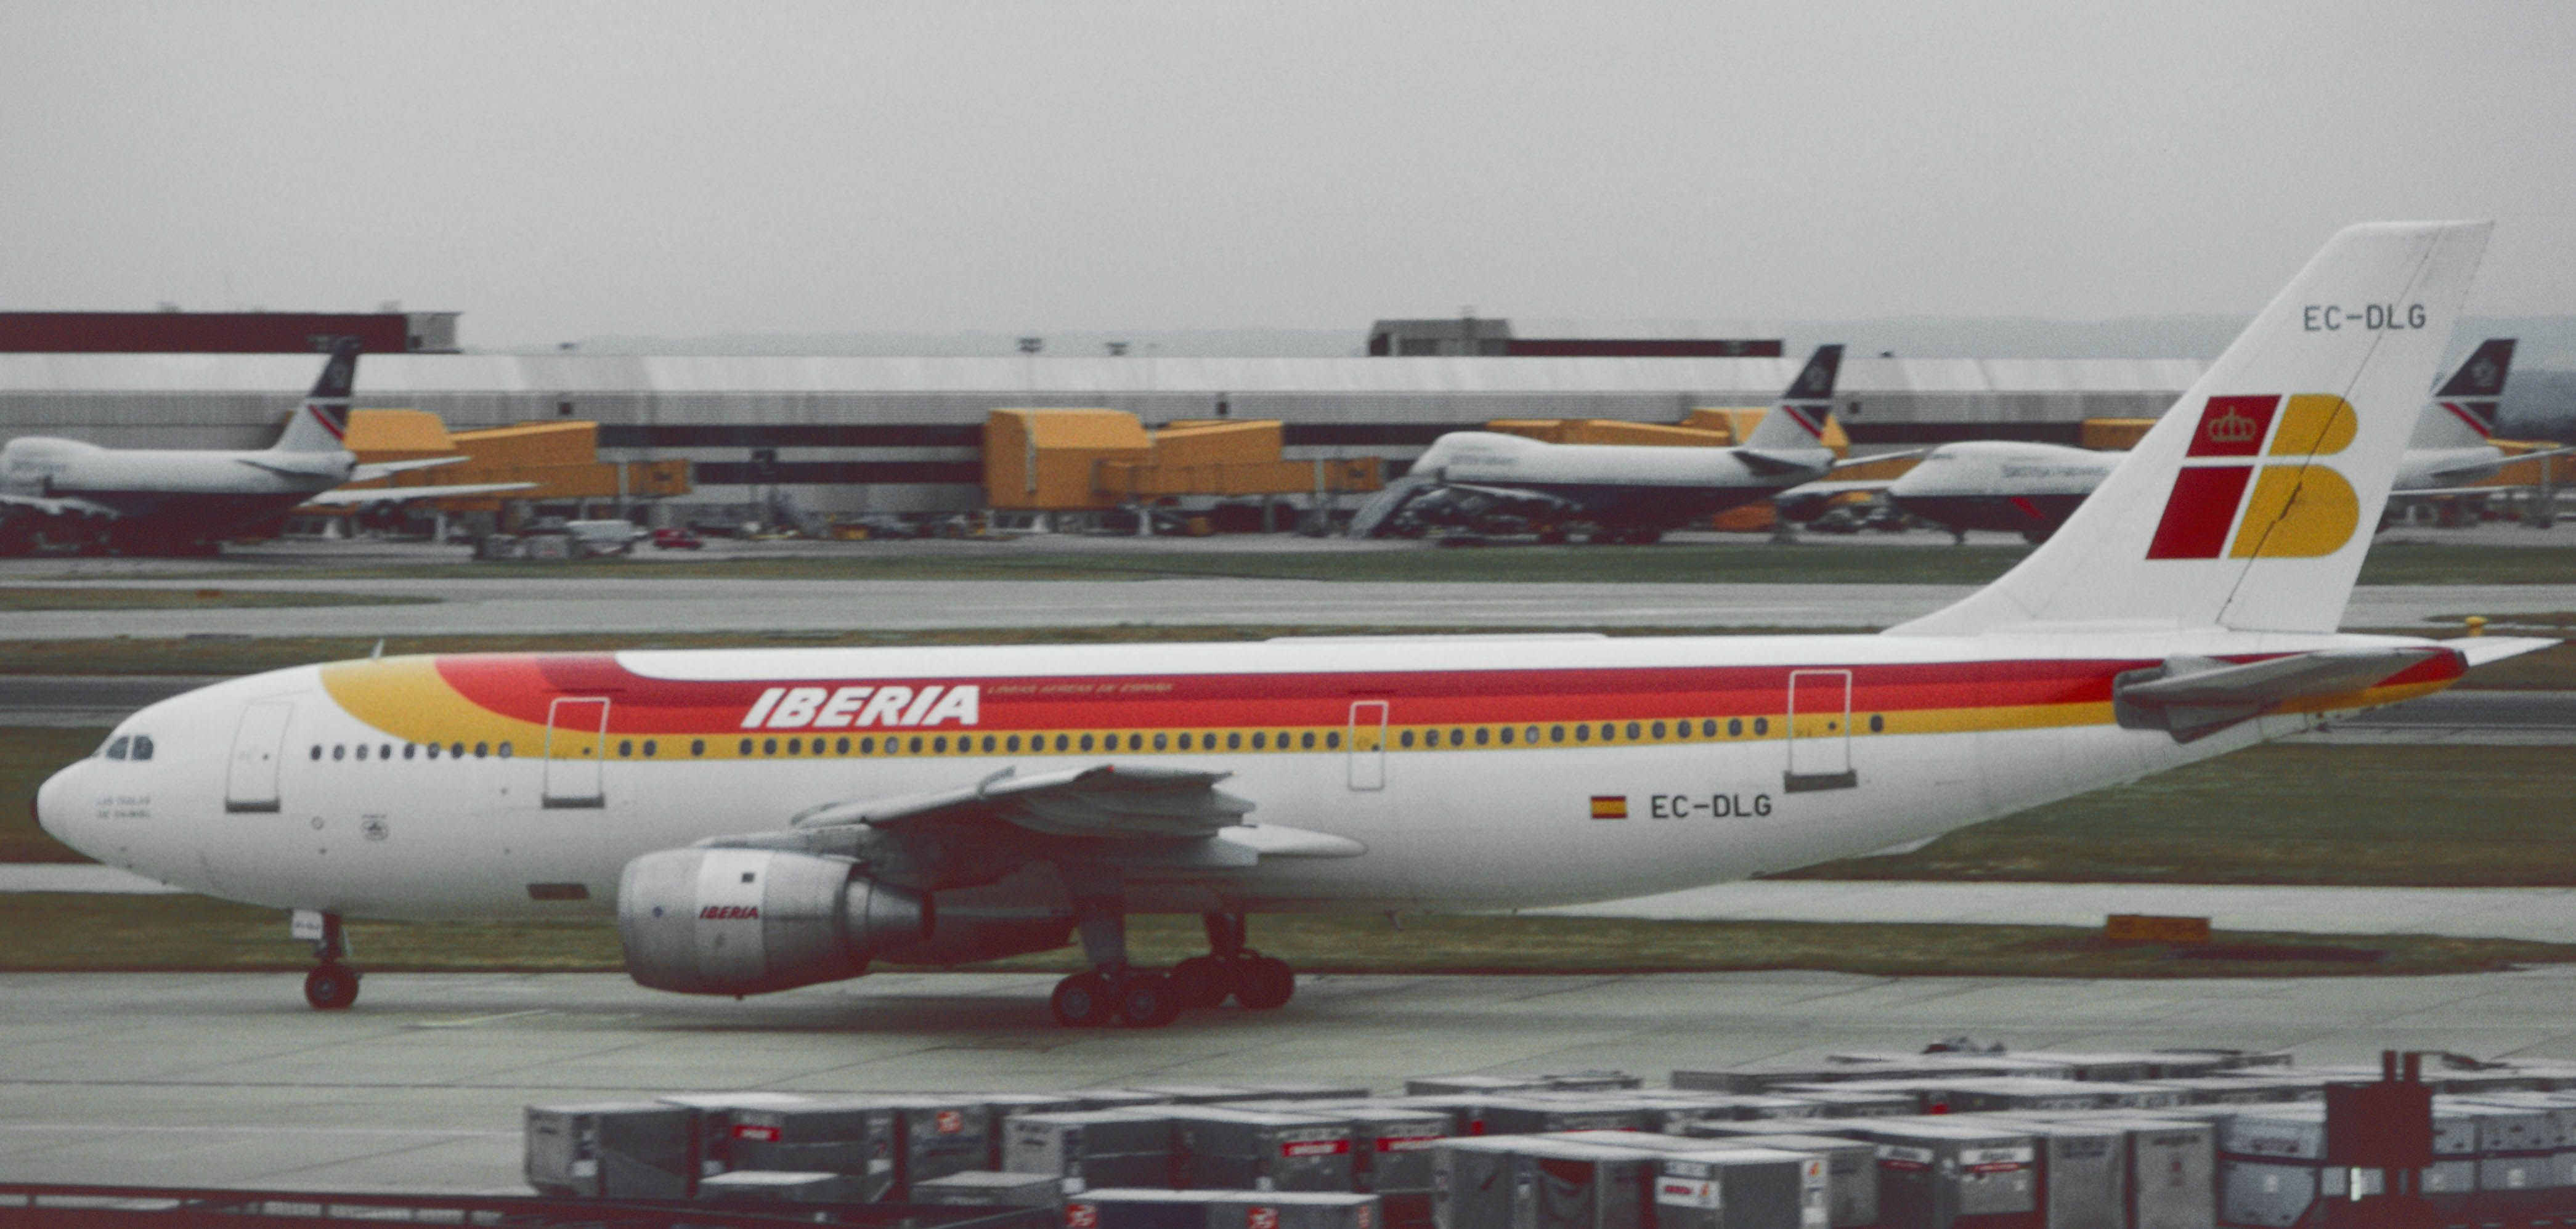 An Iberia Airbus A300 taxiing to the runway.